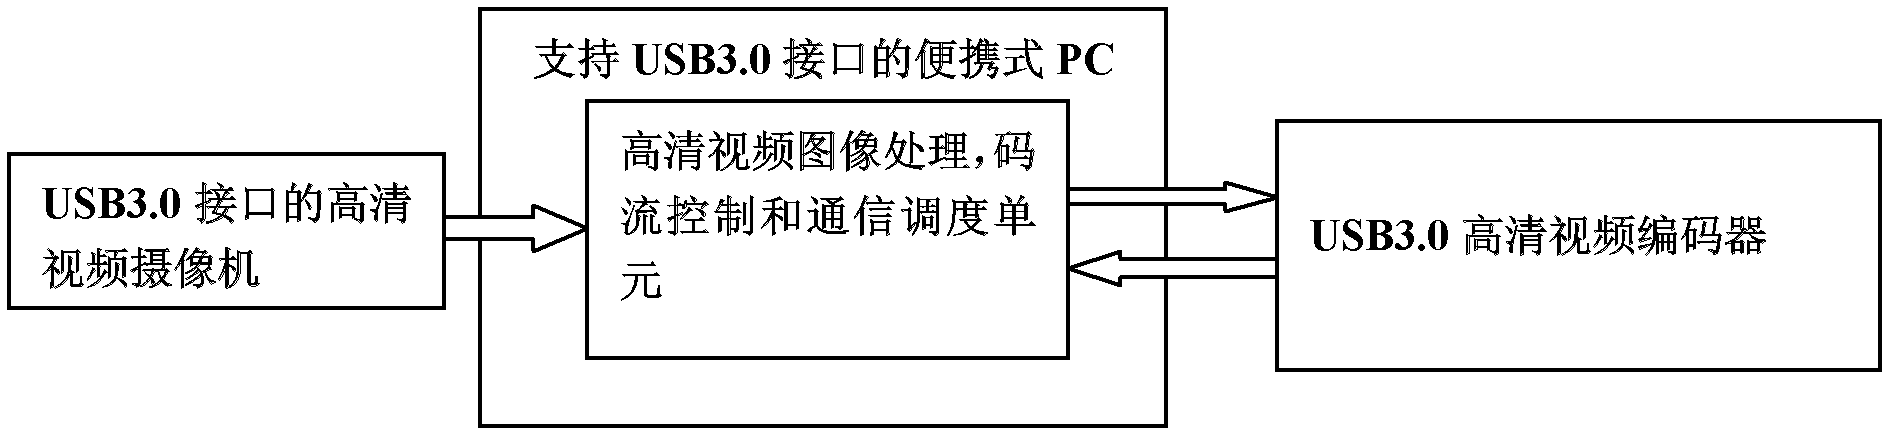 PC hierarchy-based real-time high definition video communication terminal